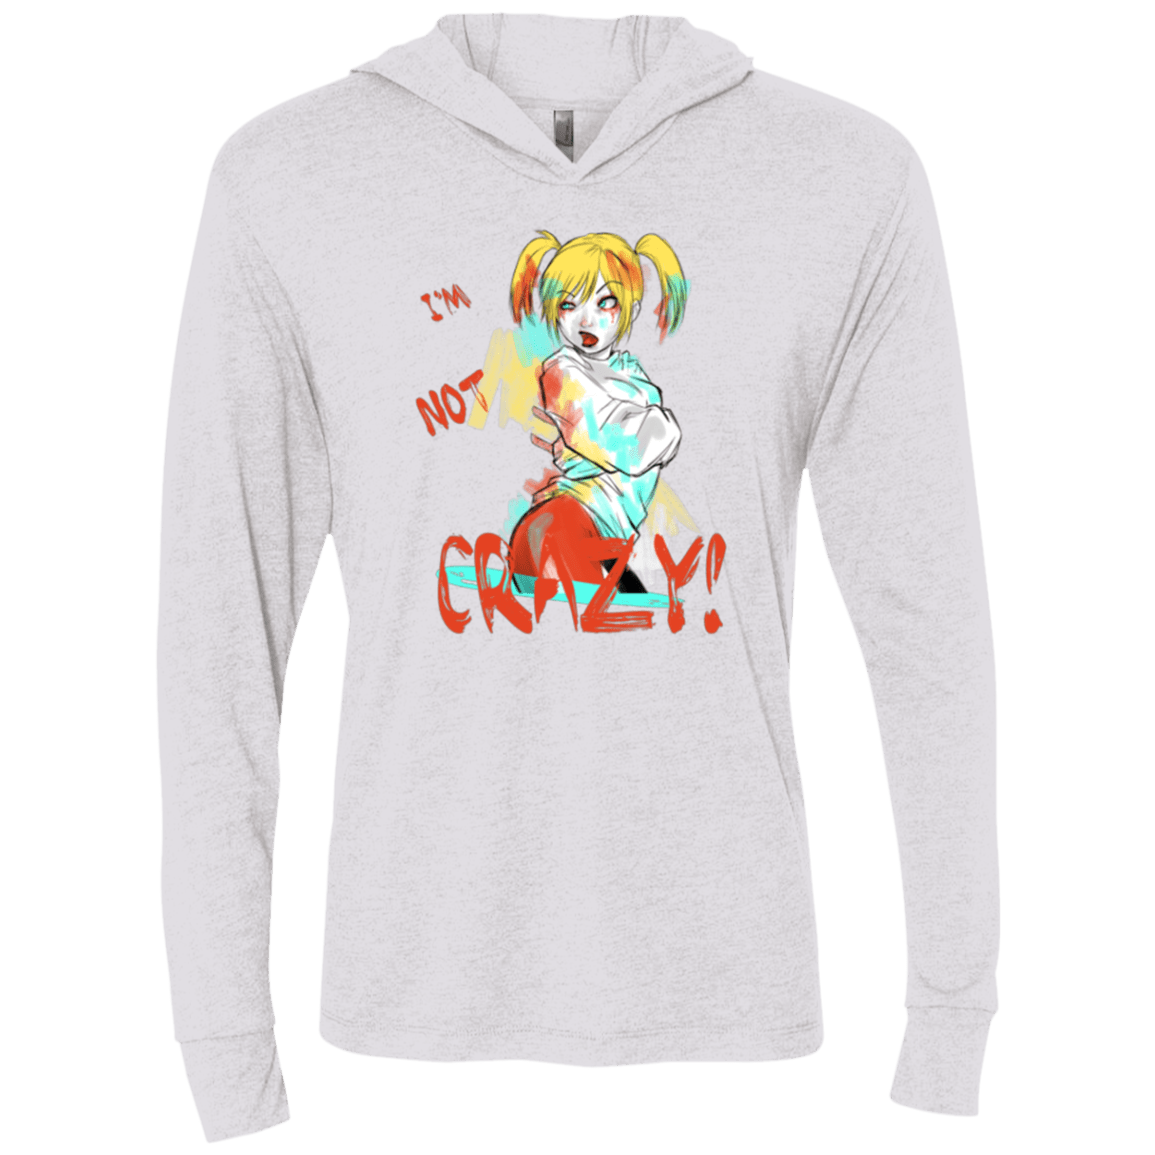 T-Shirts Heather White / X-Small I'm not crazy! Triblend Long Sleeve Hoodie Tee